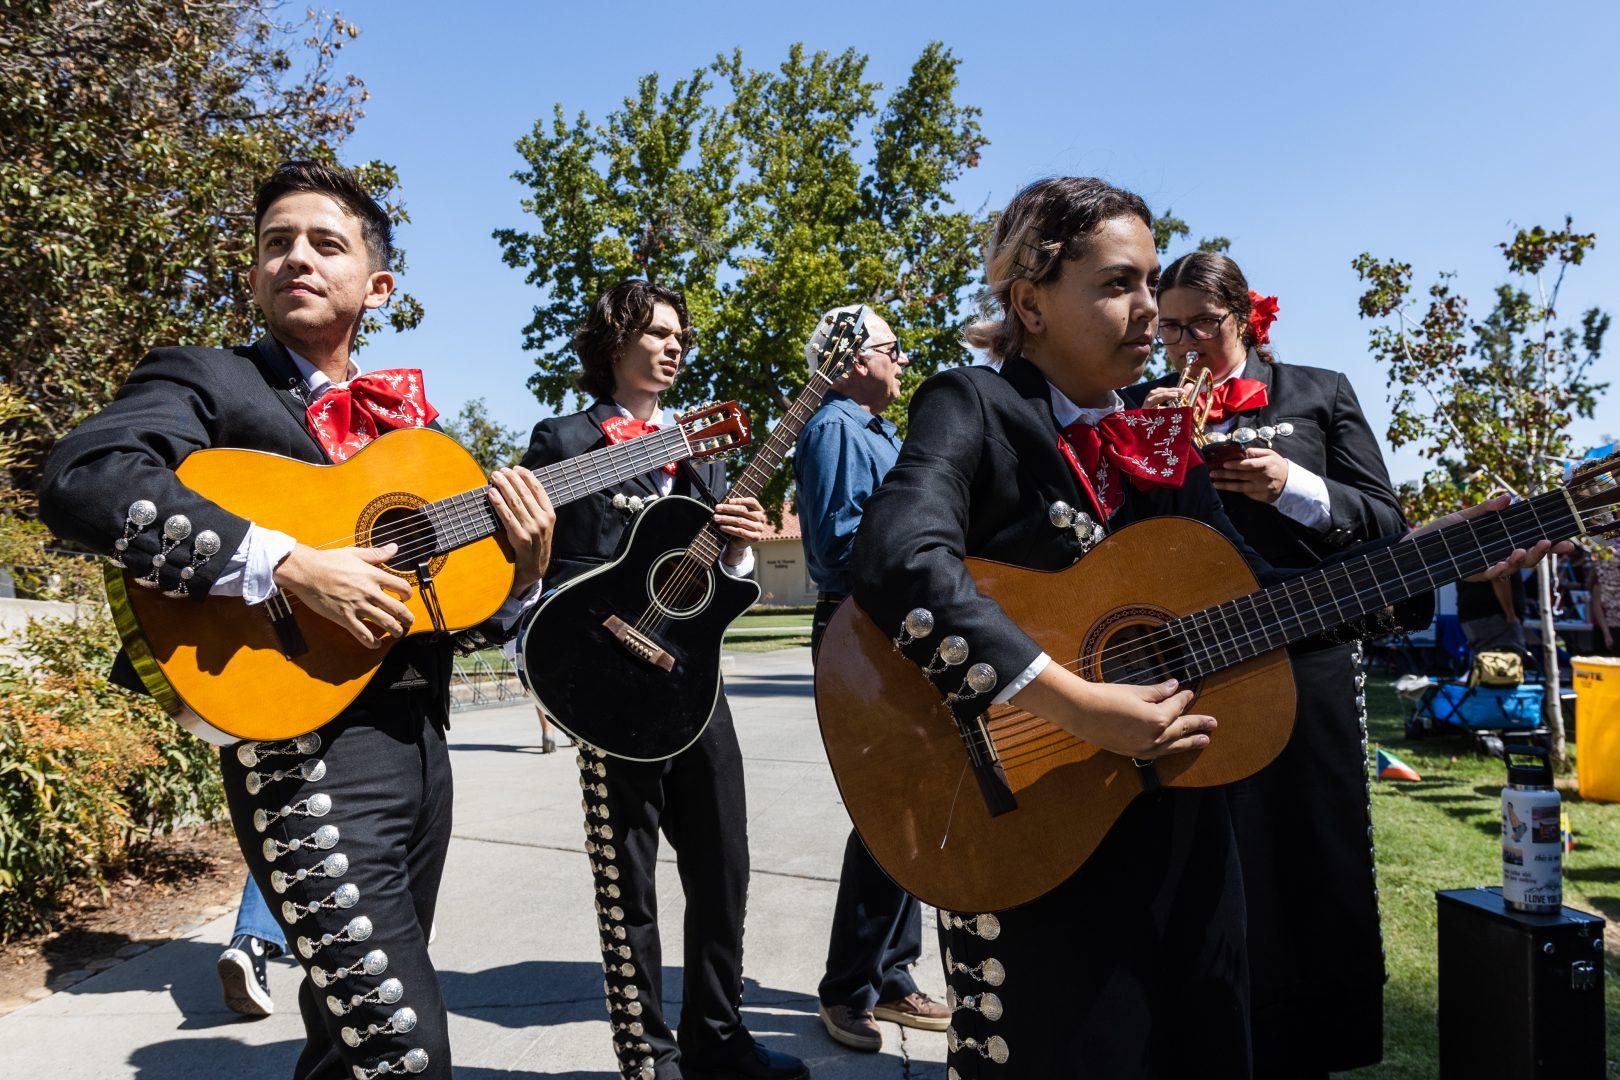 Fresno States Mariachi Orgullo guitarist tuning their instruments before their performances at the Bienvenida in front of the Kennel Bookstore on Wednesday, September 21, 2022. (Carlos Rene Castro/The Collegian)